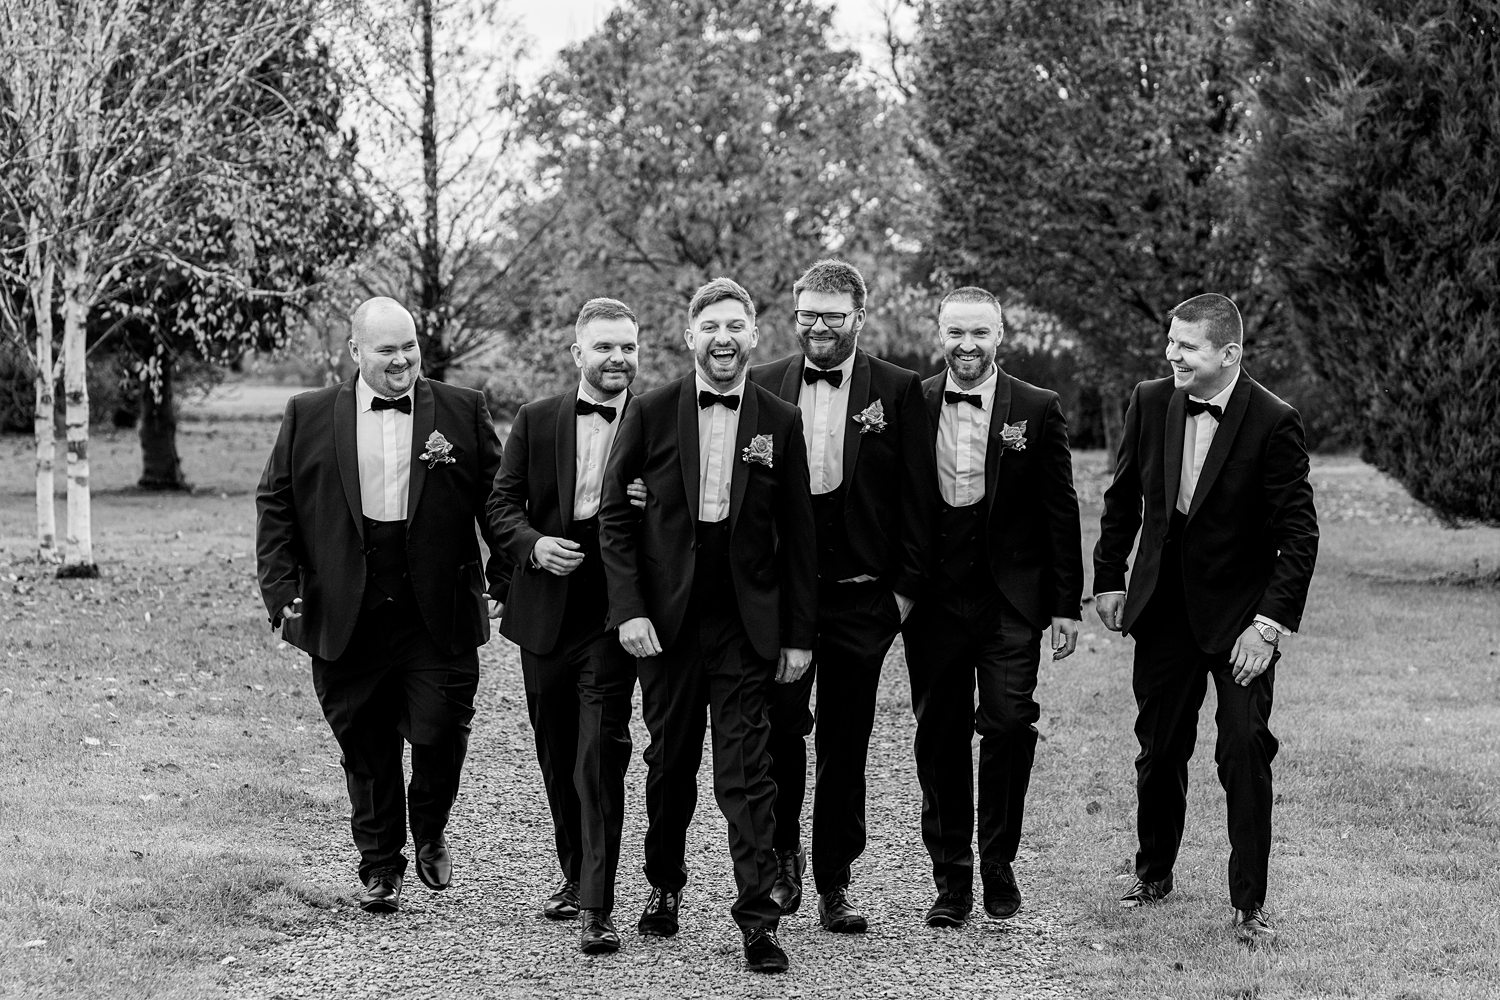 Group of men in suits laughing outdoors.